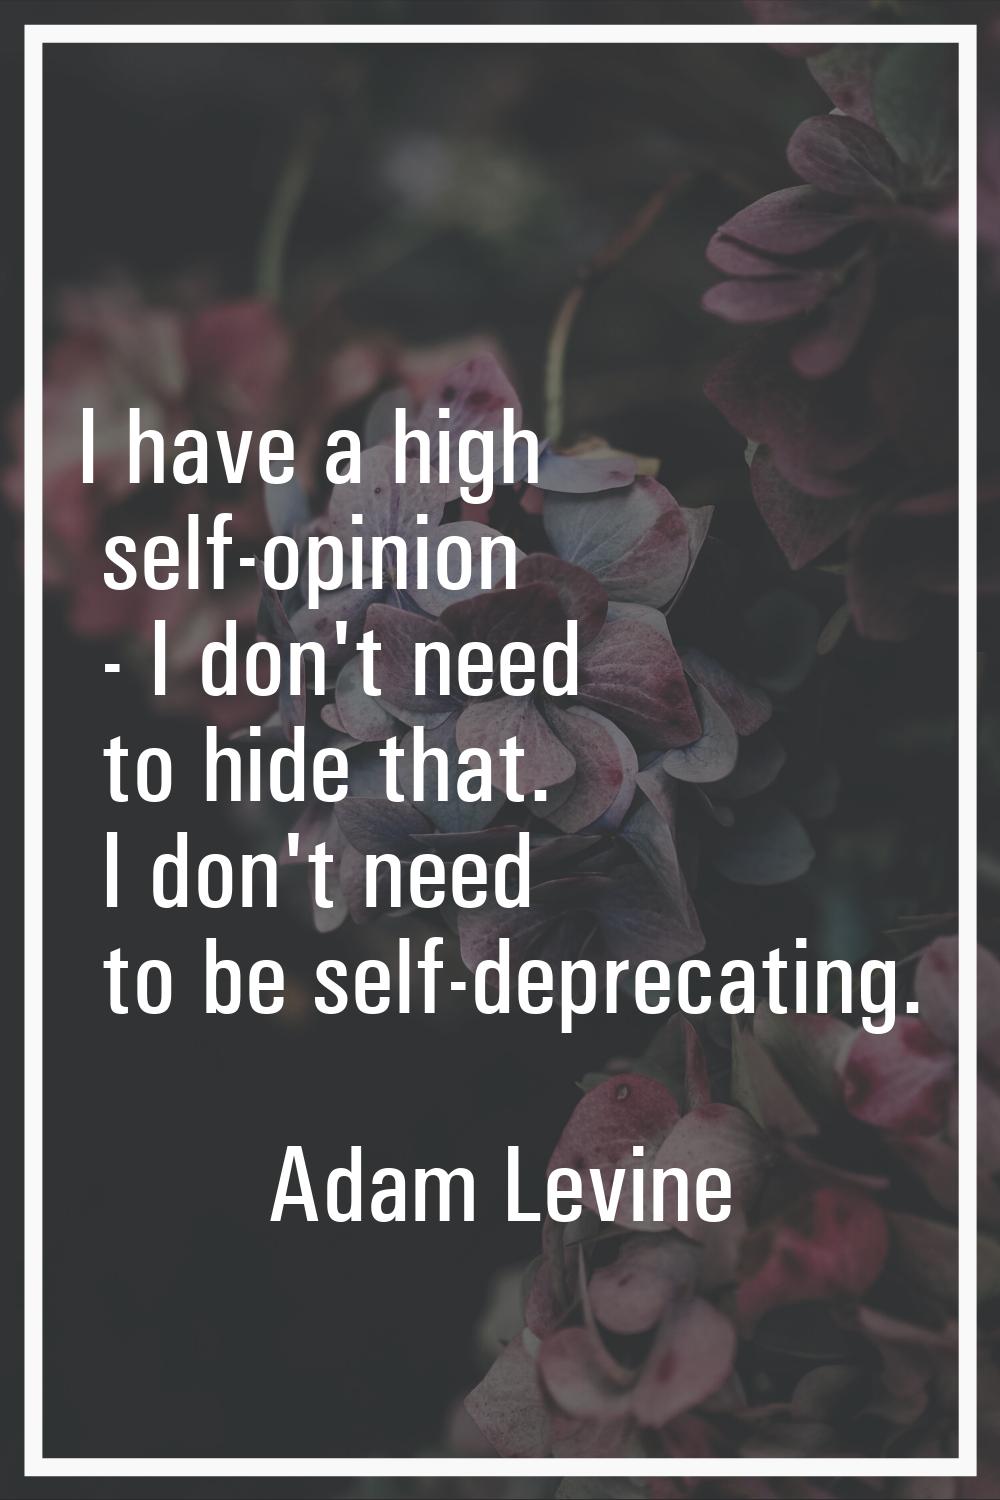 I have a high self-opinion - I don't need to hide that. I don't need to be self-deprecating.